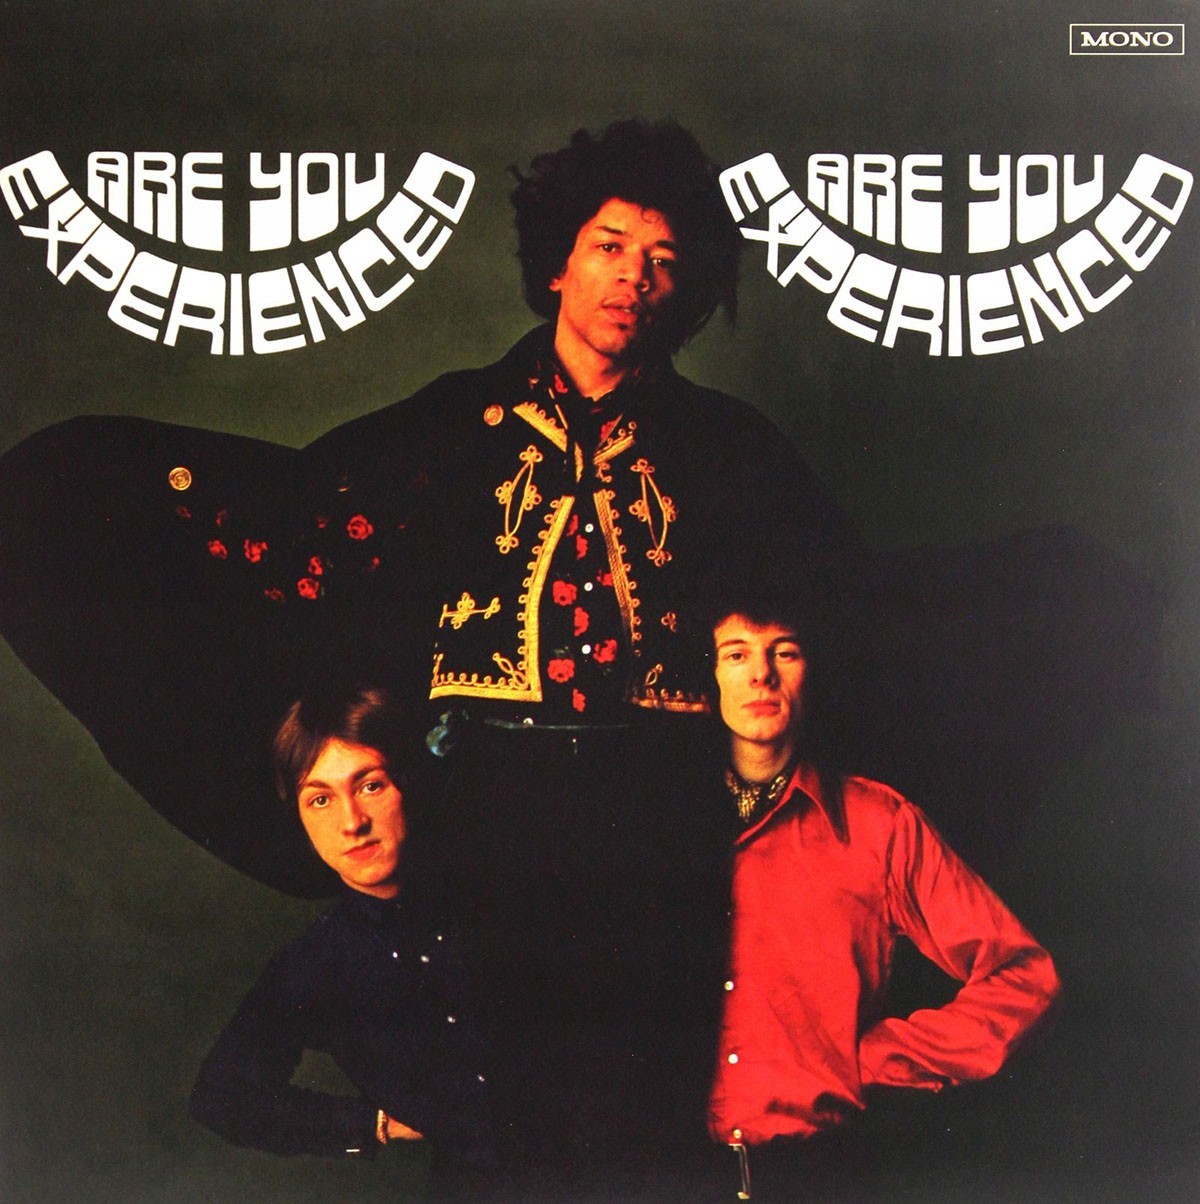 Are You Experienced – The Jimi Hendrix Experience (Track Records/Polydor Records/Reprise Records, 1967)